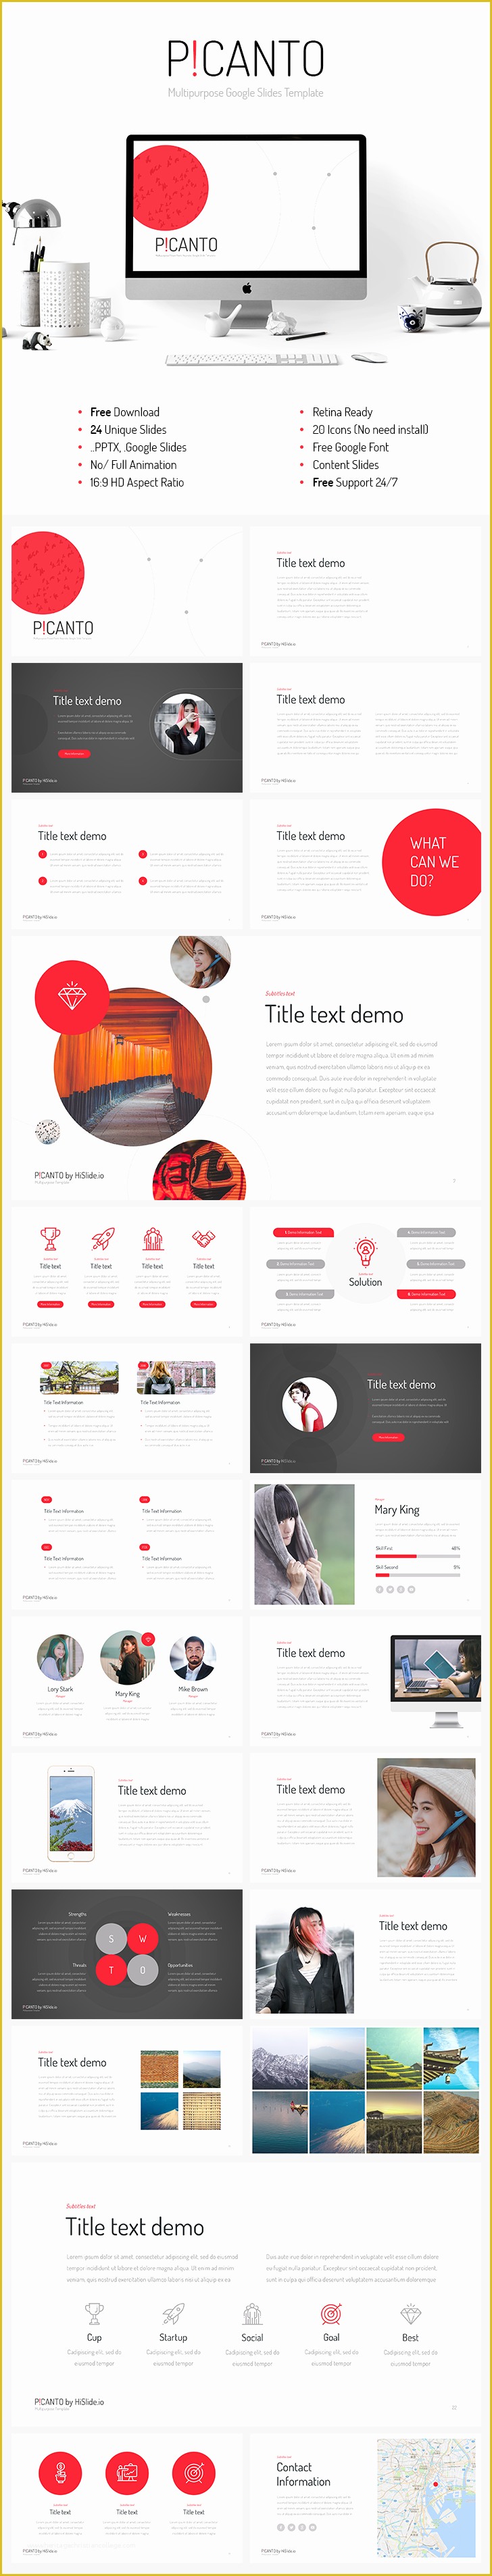 Free Google Templates Of Picanto Google Slides Template Free Free